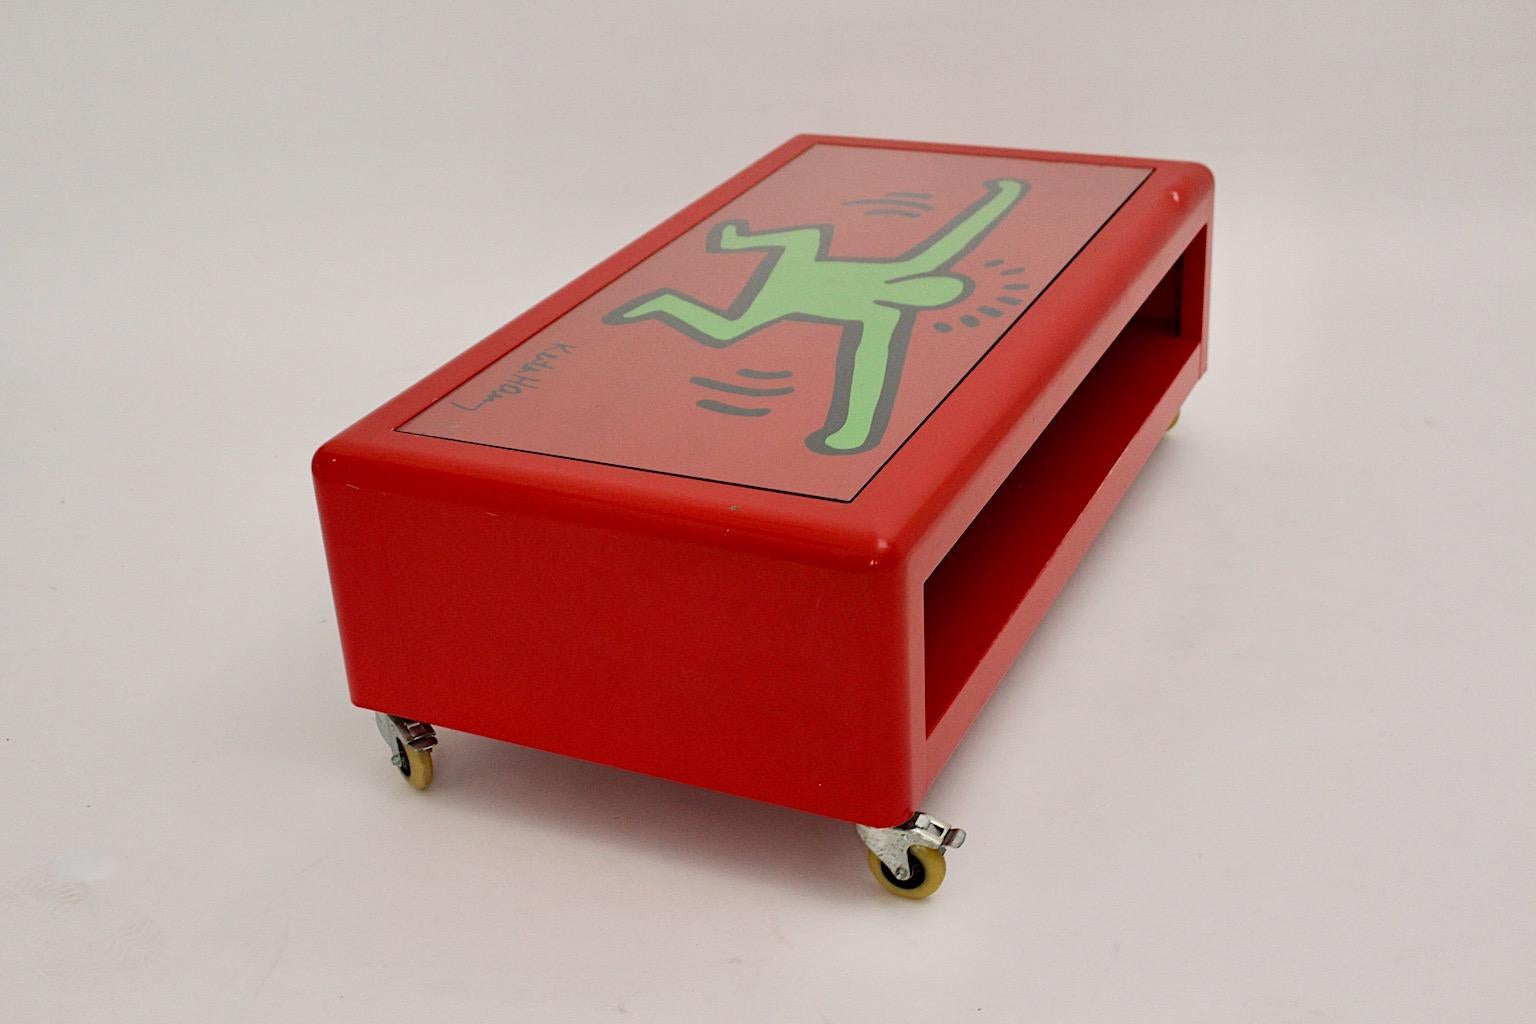 Modern Keith Haring Low Pop Art Sofa Table Red Green Metal Bretz 1998 Germany For Sale